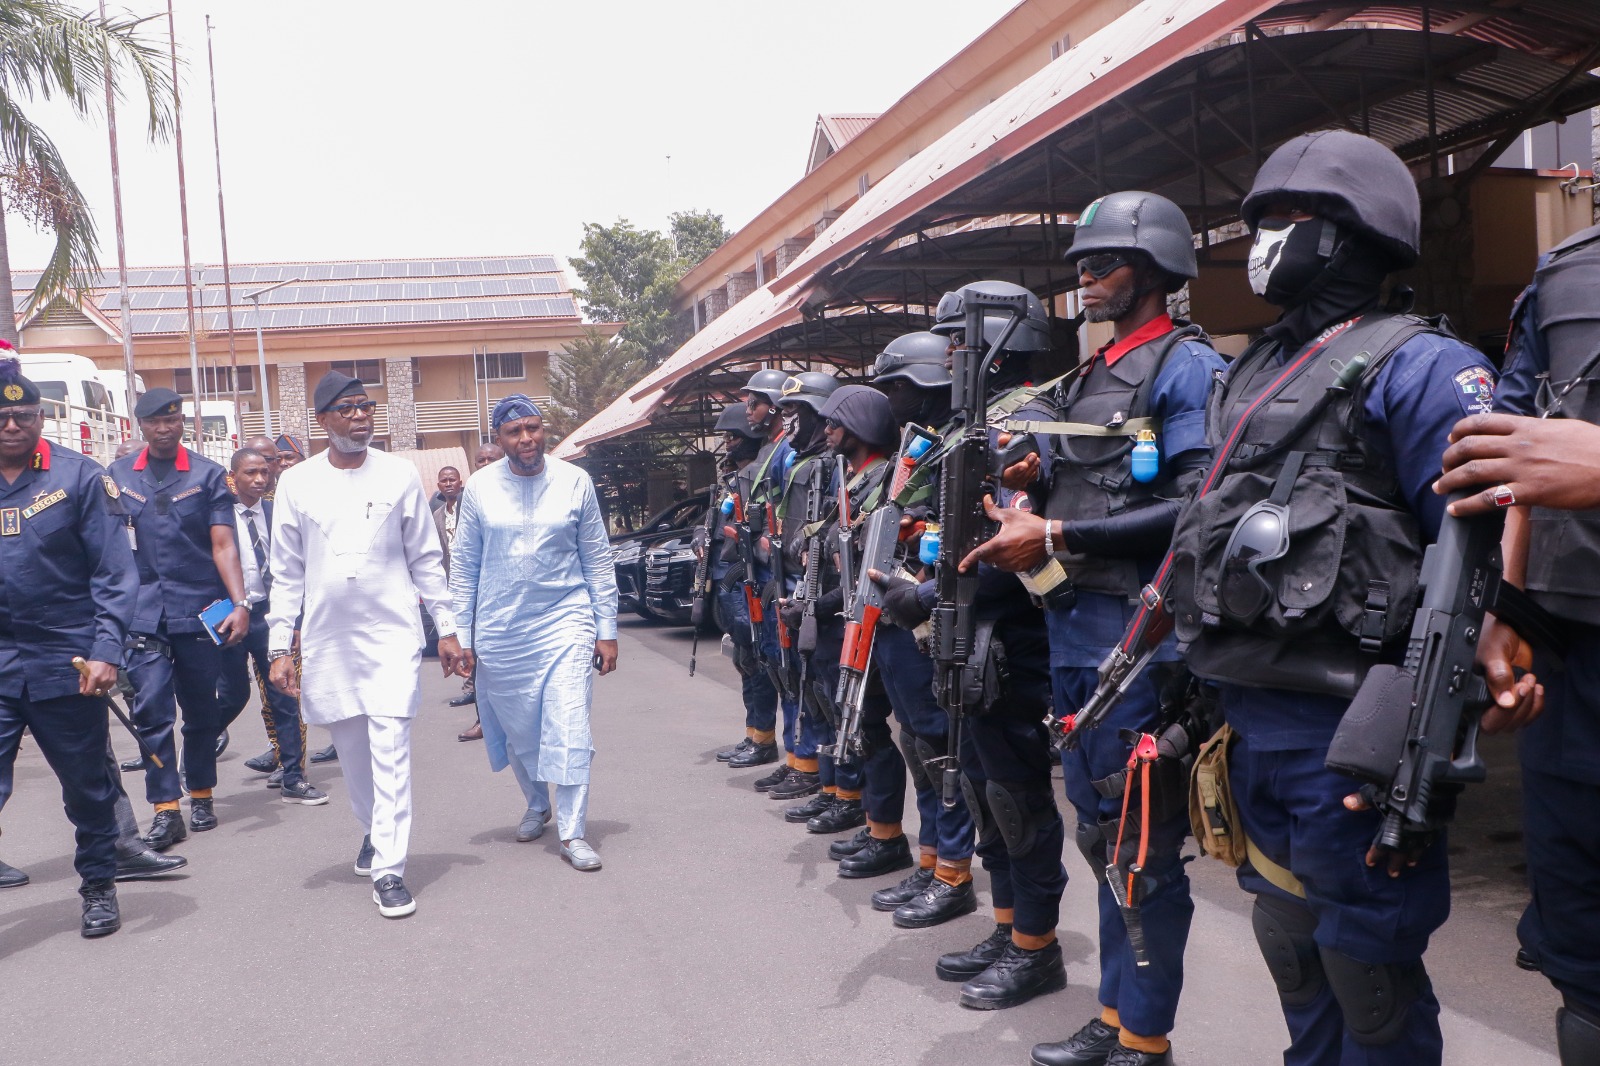 Alake Introduces Mines Marshal to Safeguard Mining Locations, Urges Crackdown on Illegal Activity